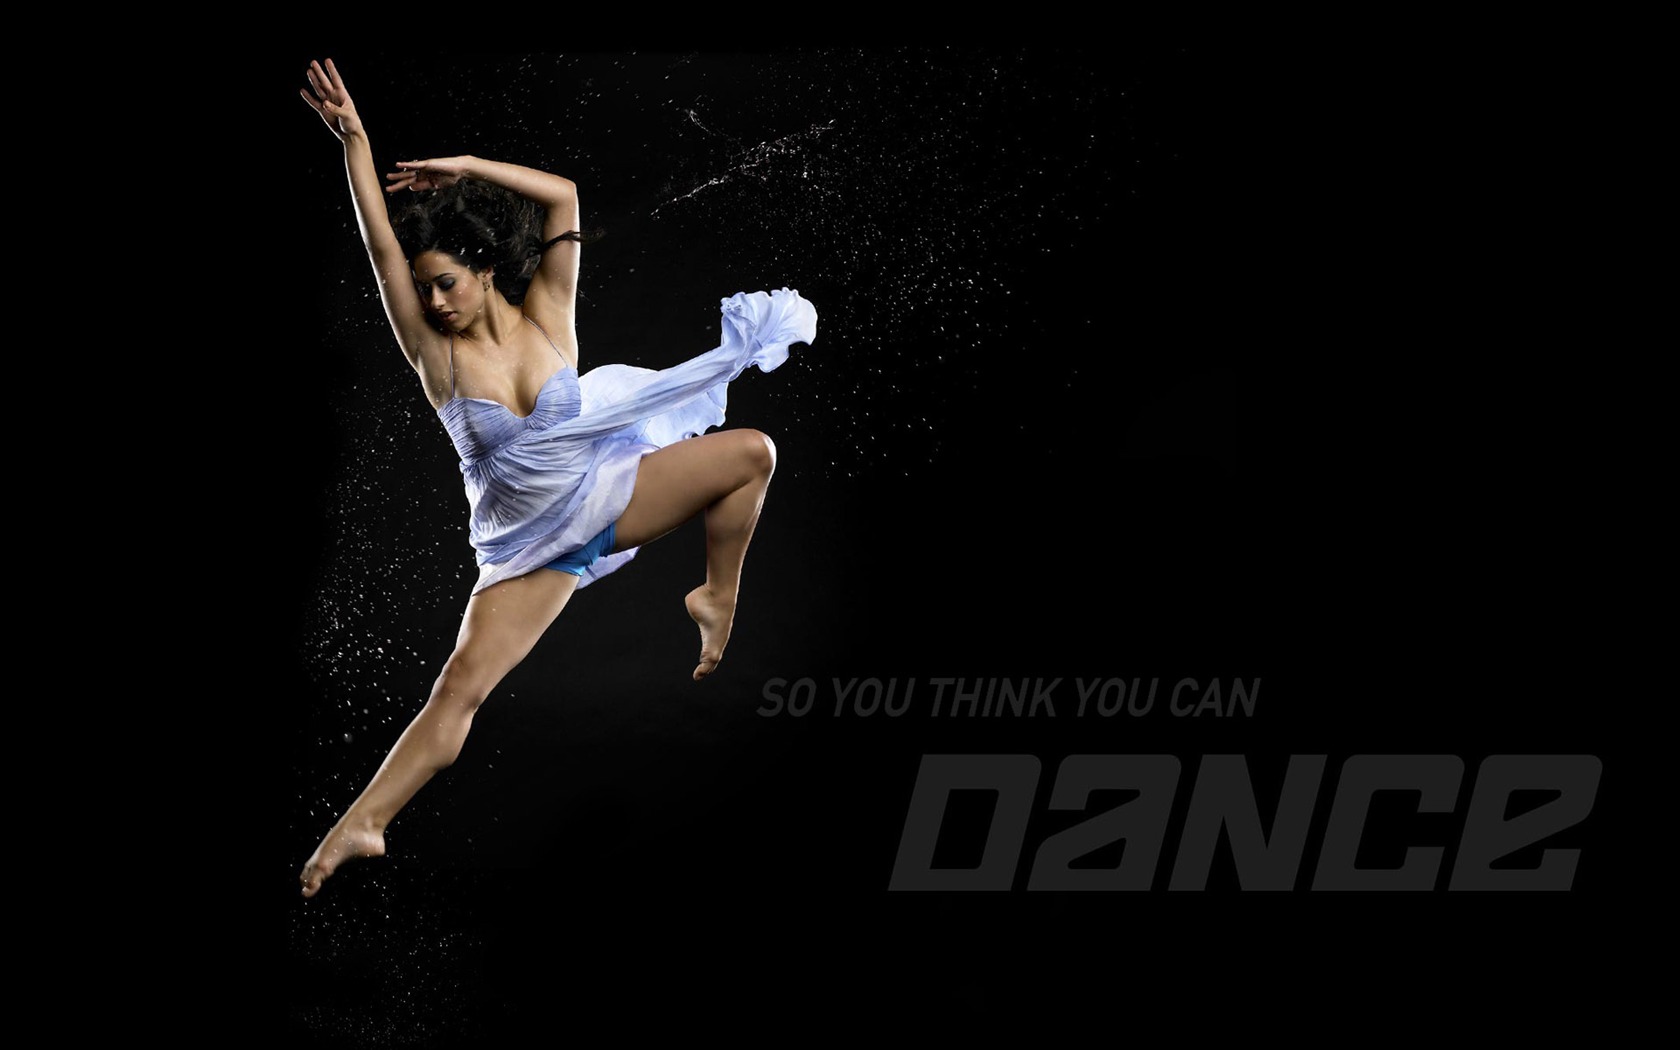 So You Think You Can Dance 舞林争霸 壁纸(一)3 - 1680x1050